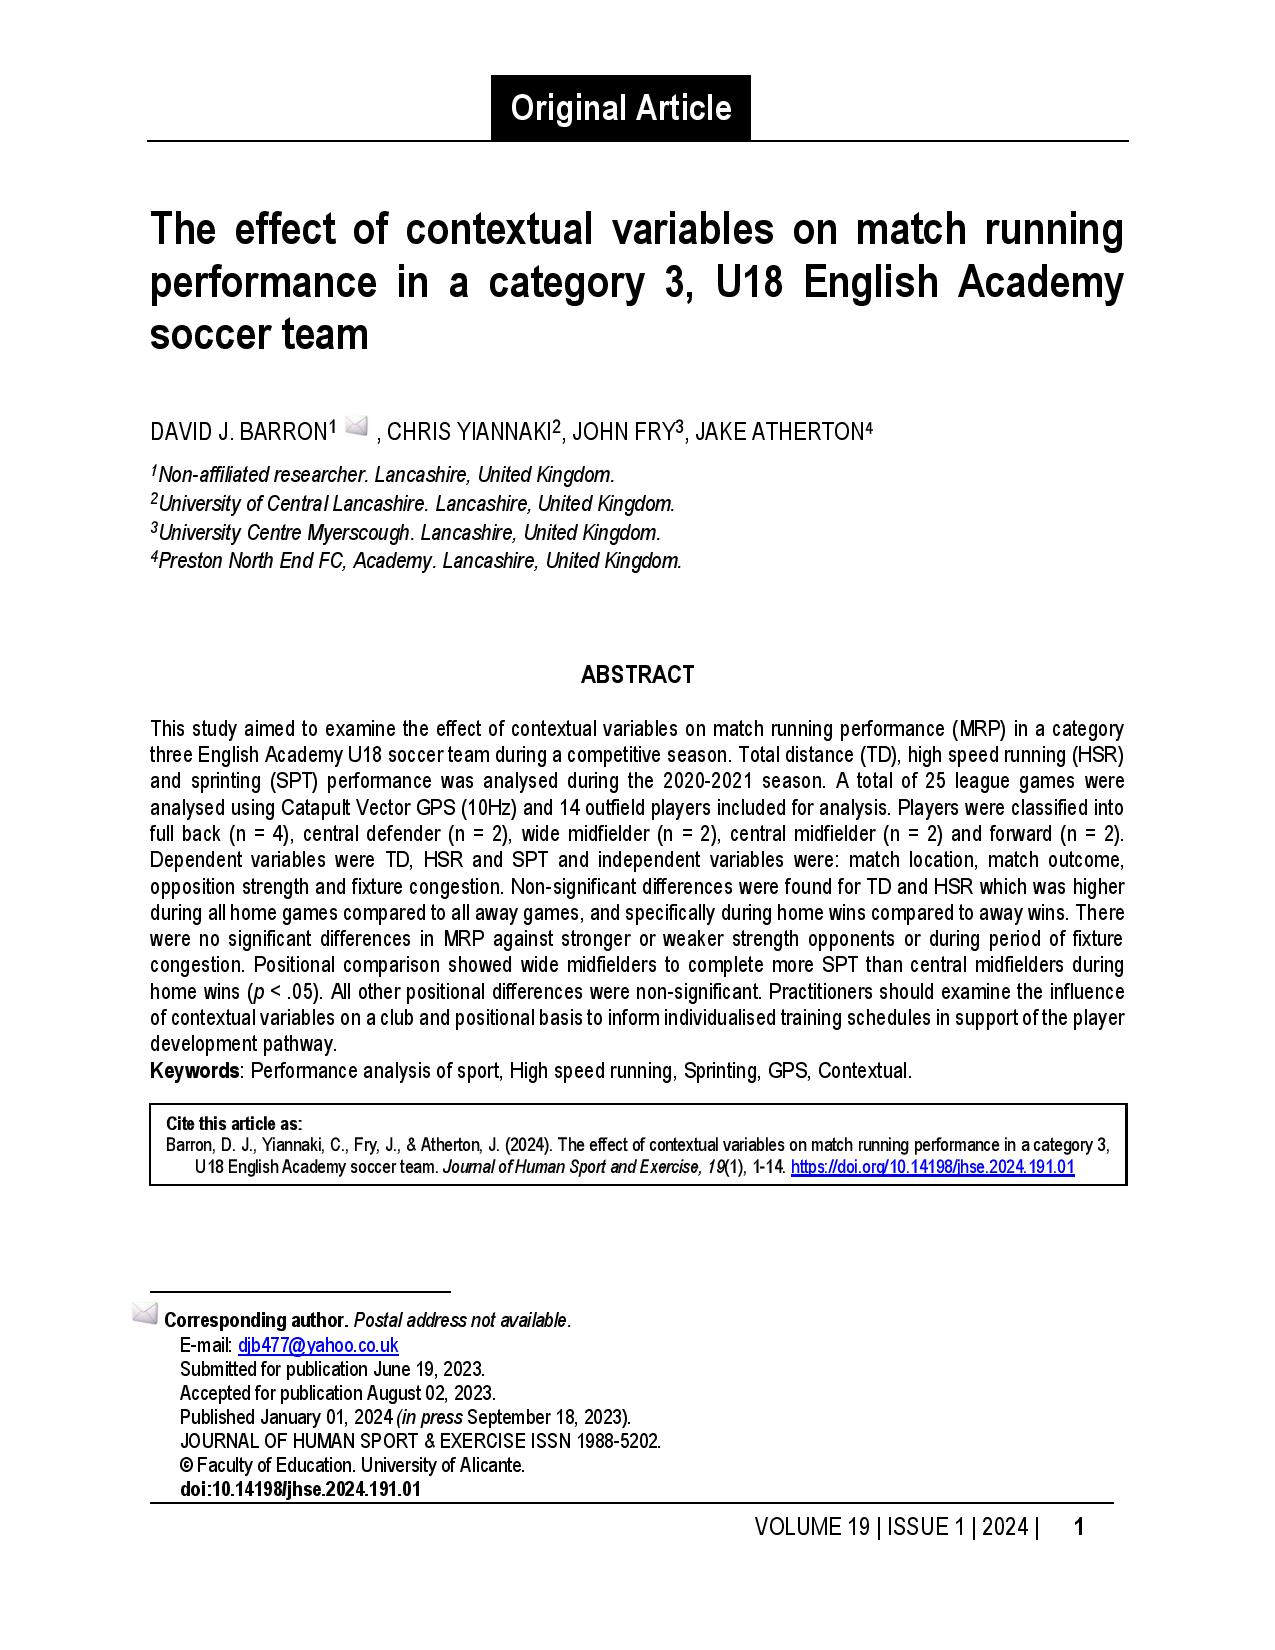 The effect of contextual variables on match running performance in a category 3, U18 English Academy soccer team